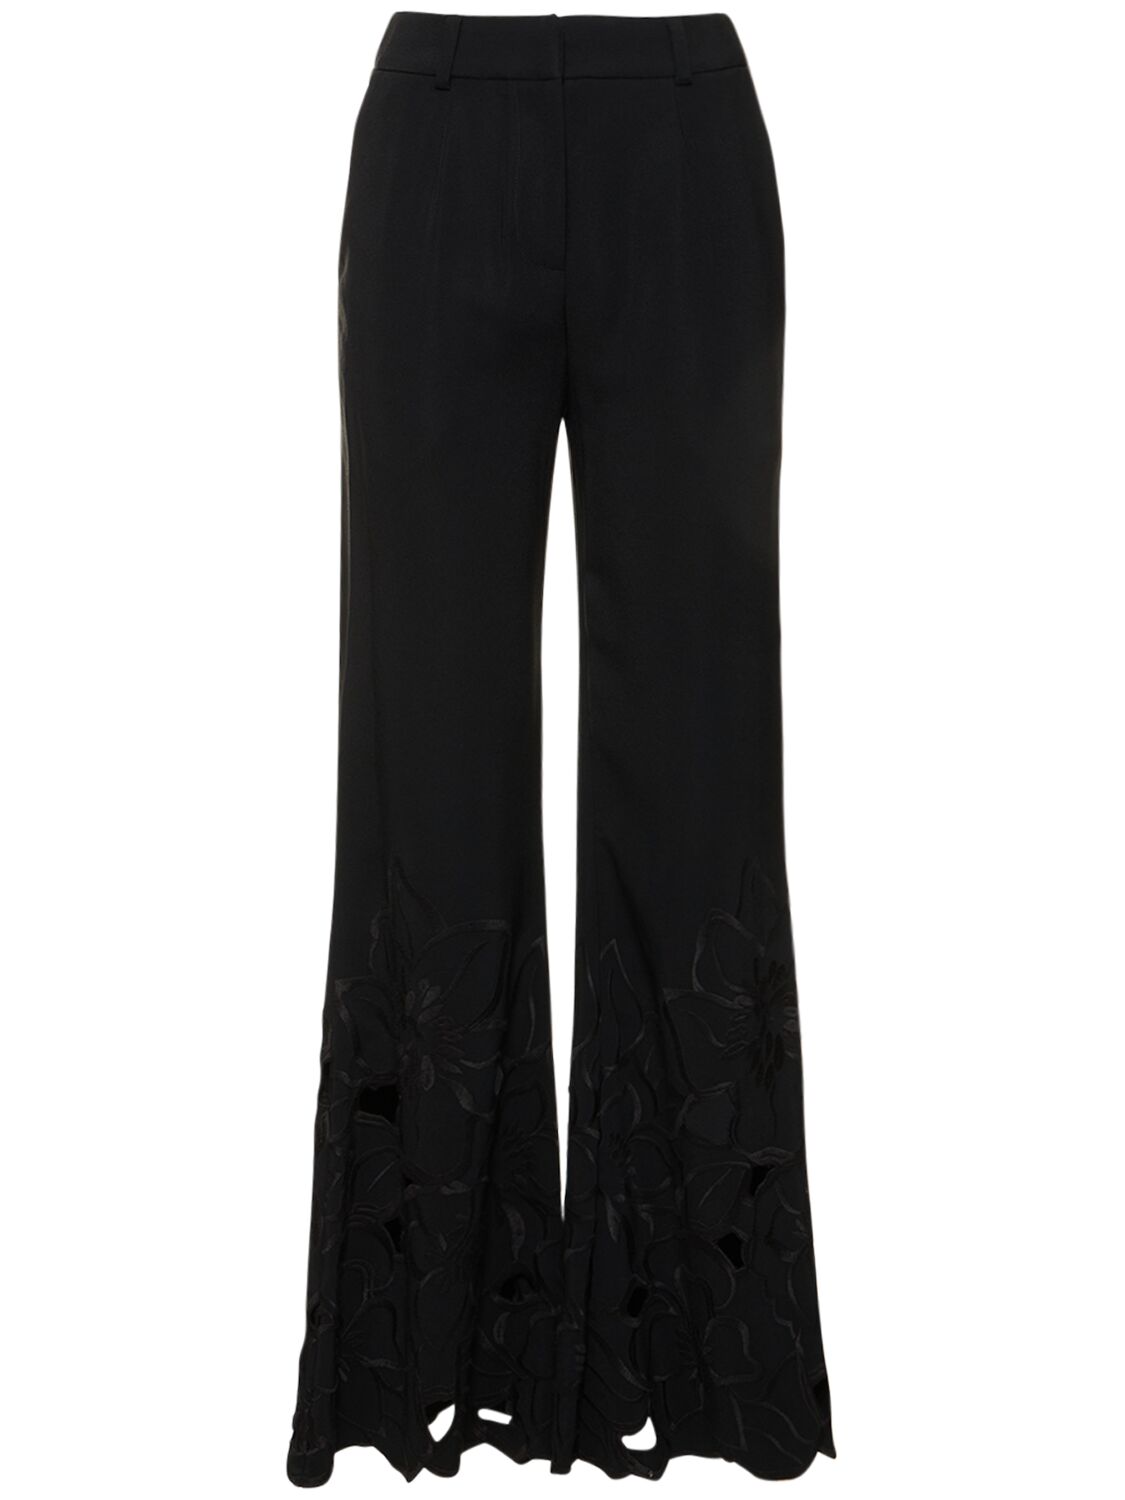 Cady and satin flared pants in black - Elie Saab